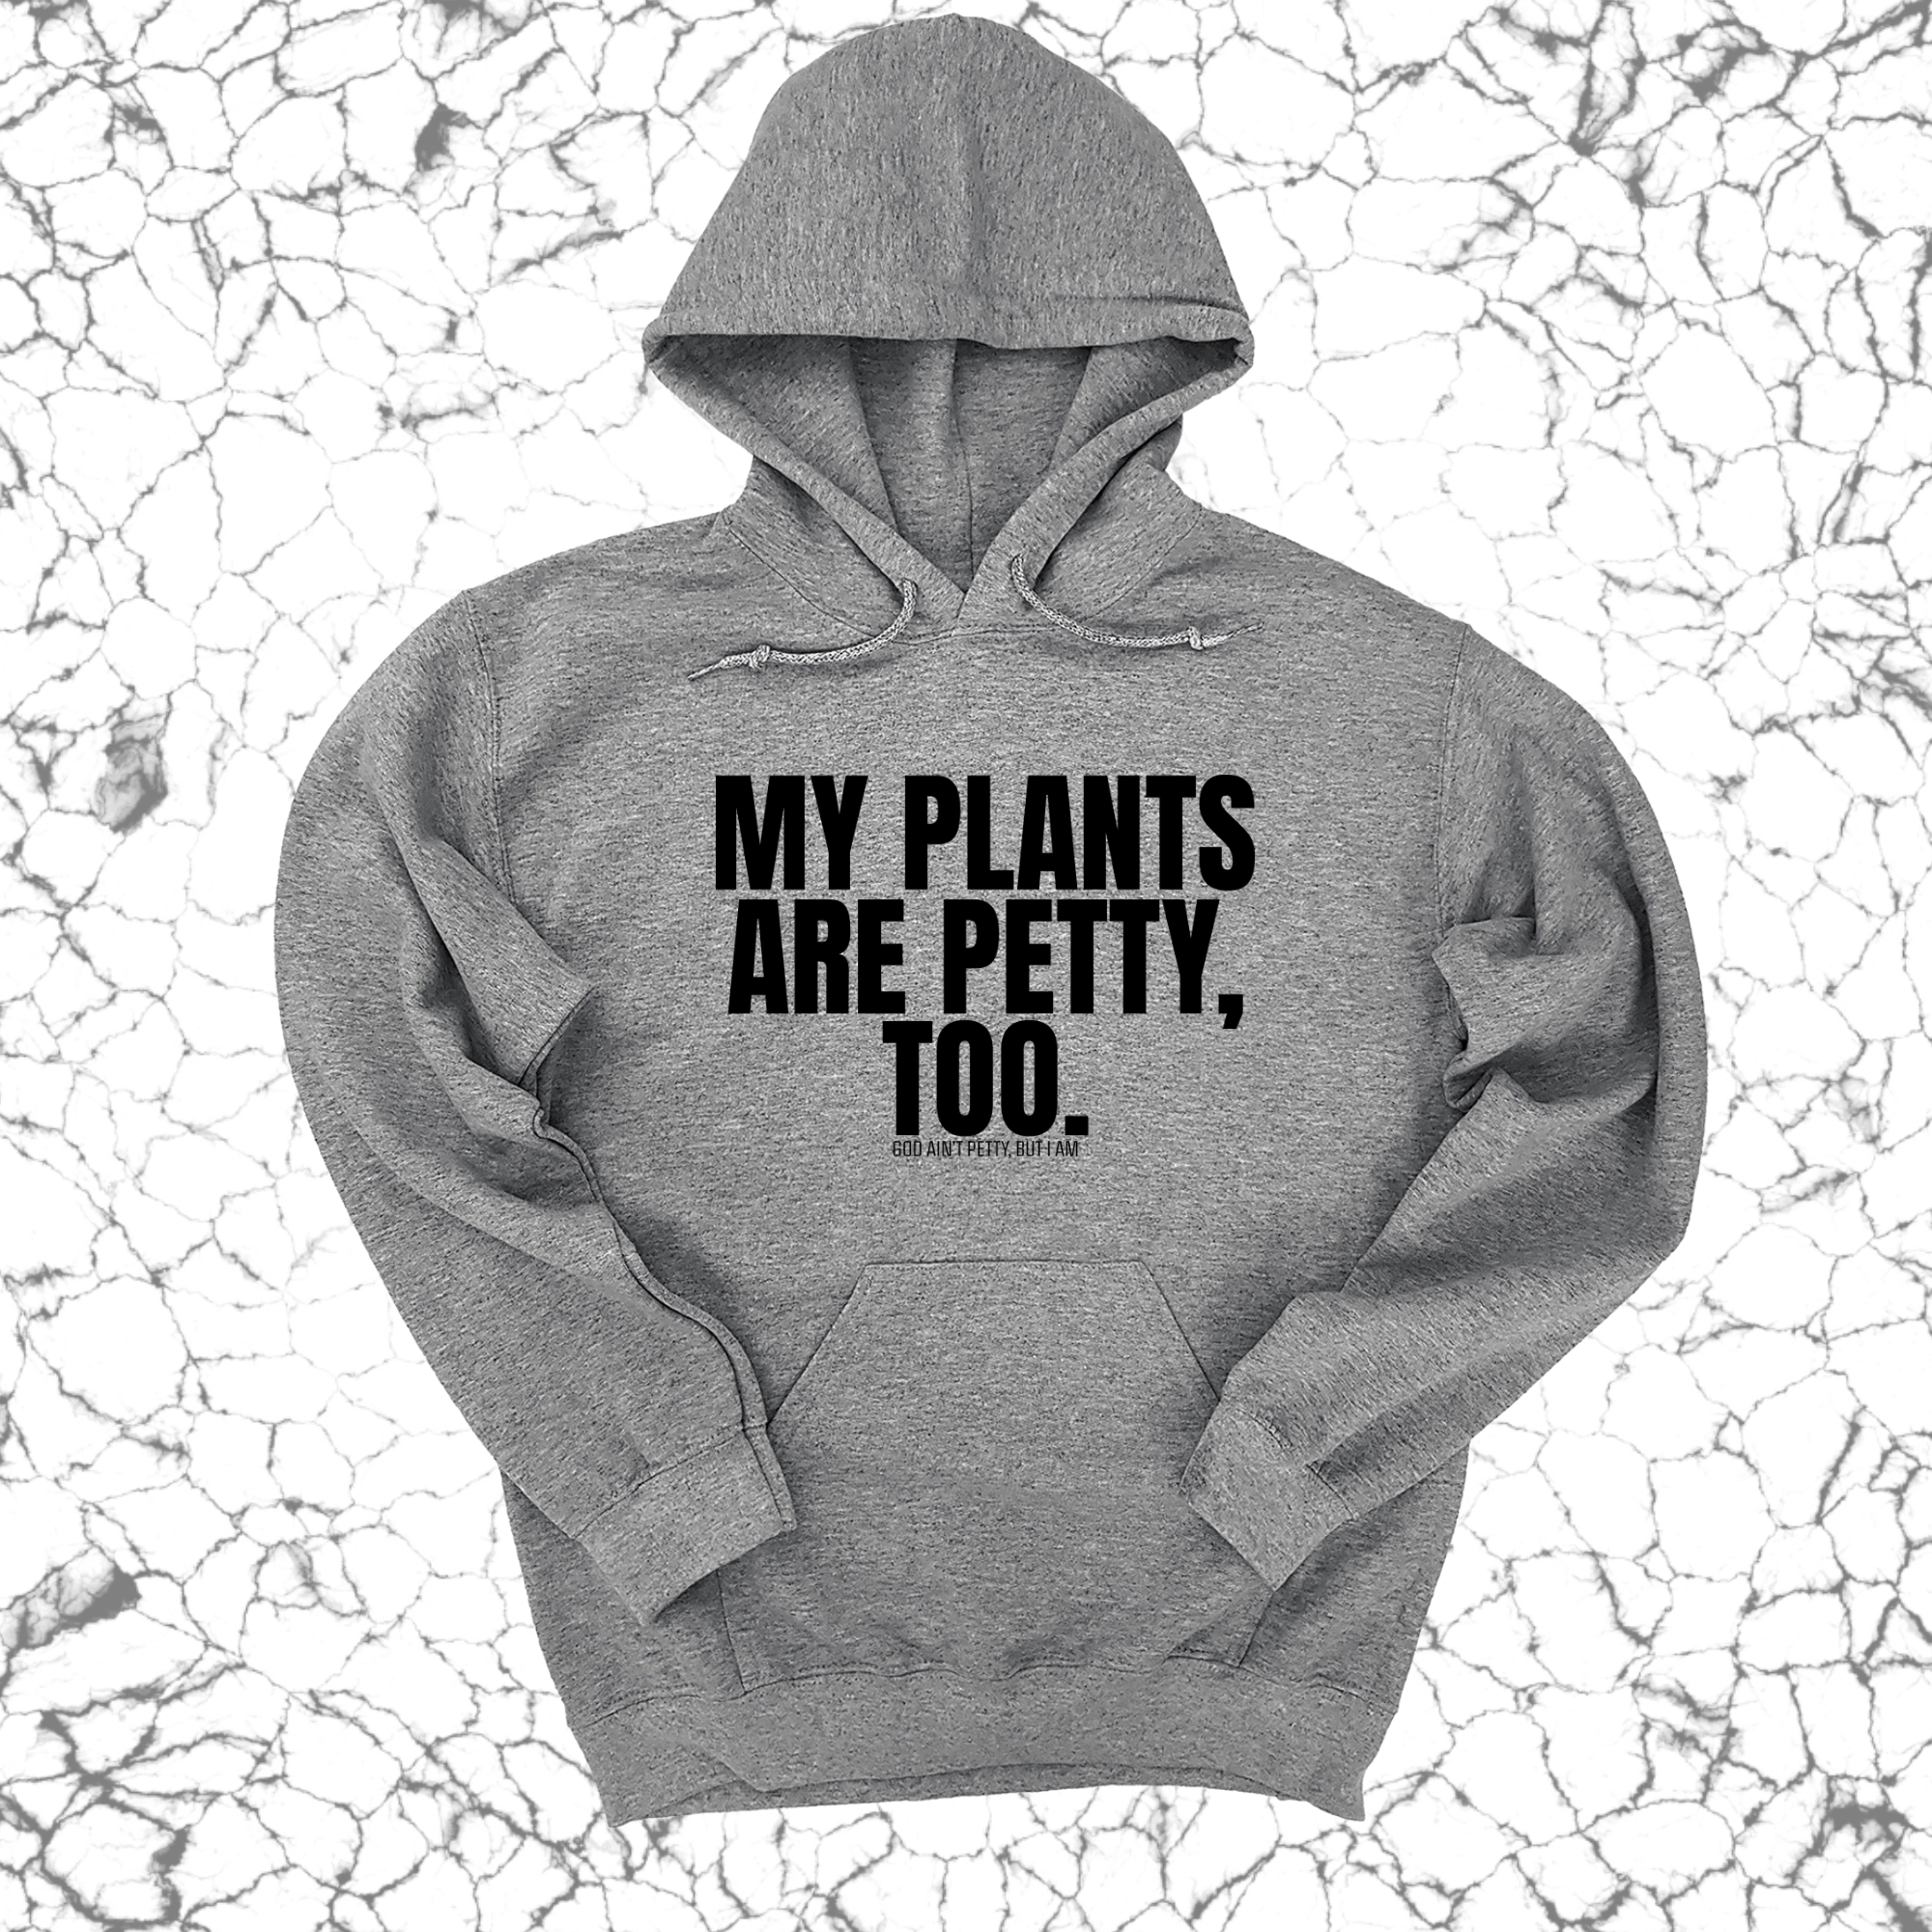 My Plants are Petty too Unisex Hoodie-Hoodie-The Original God Ain't Petty But I Am